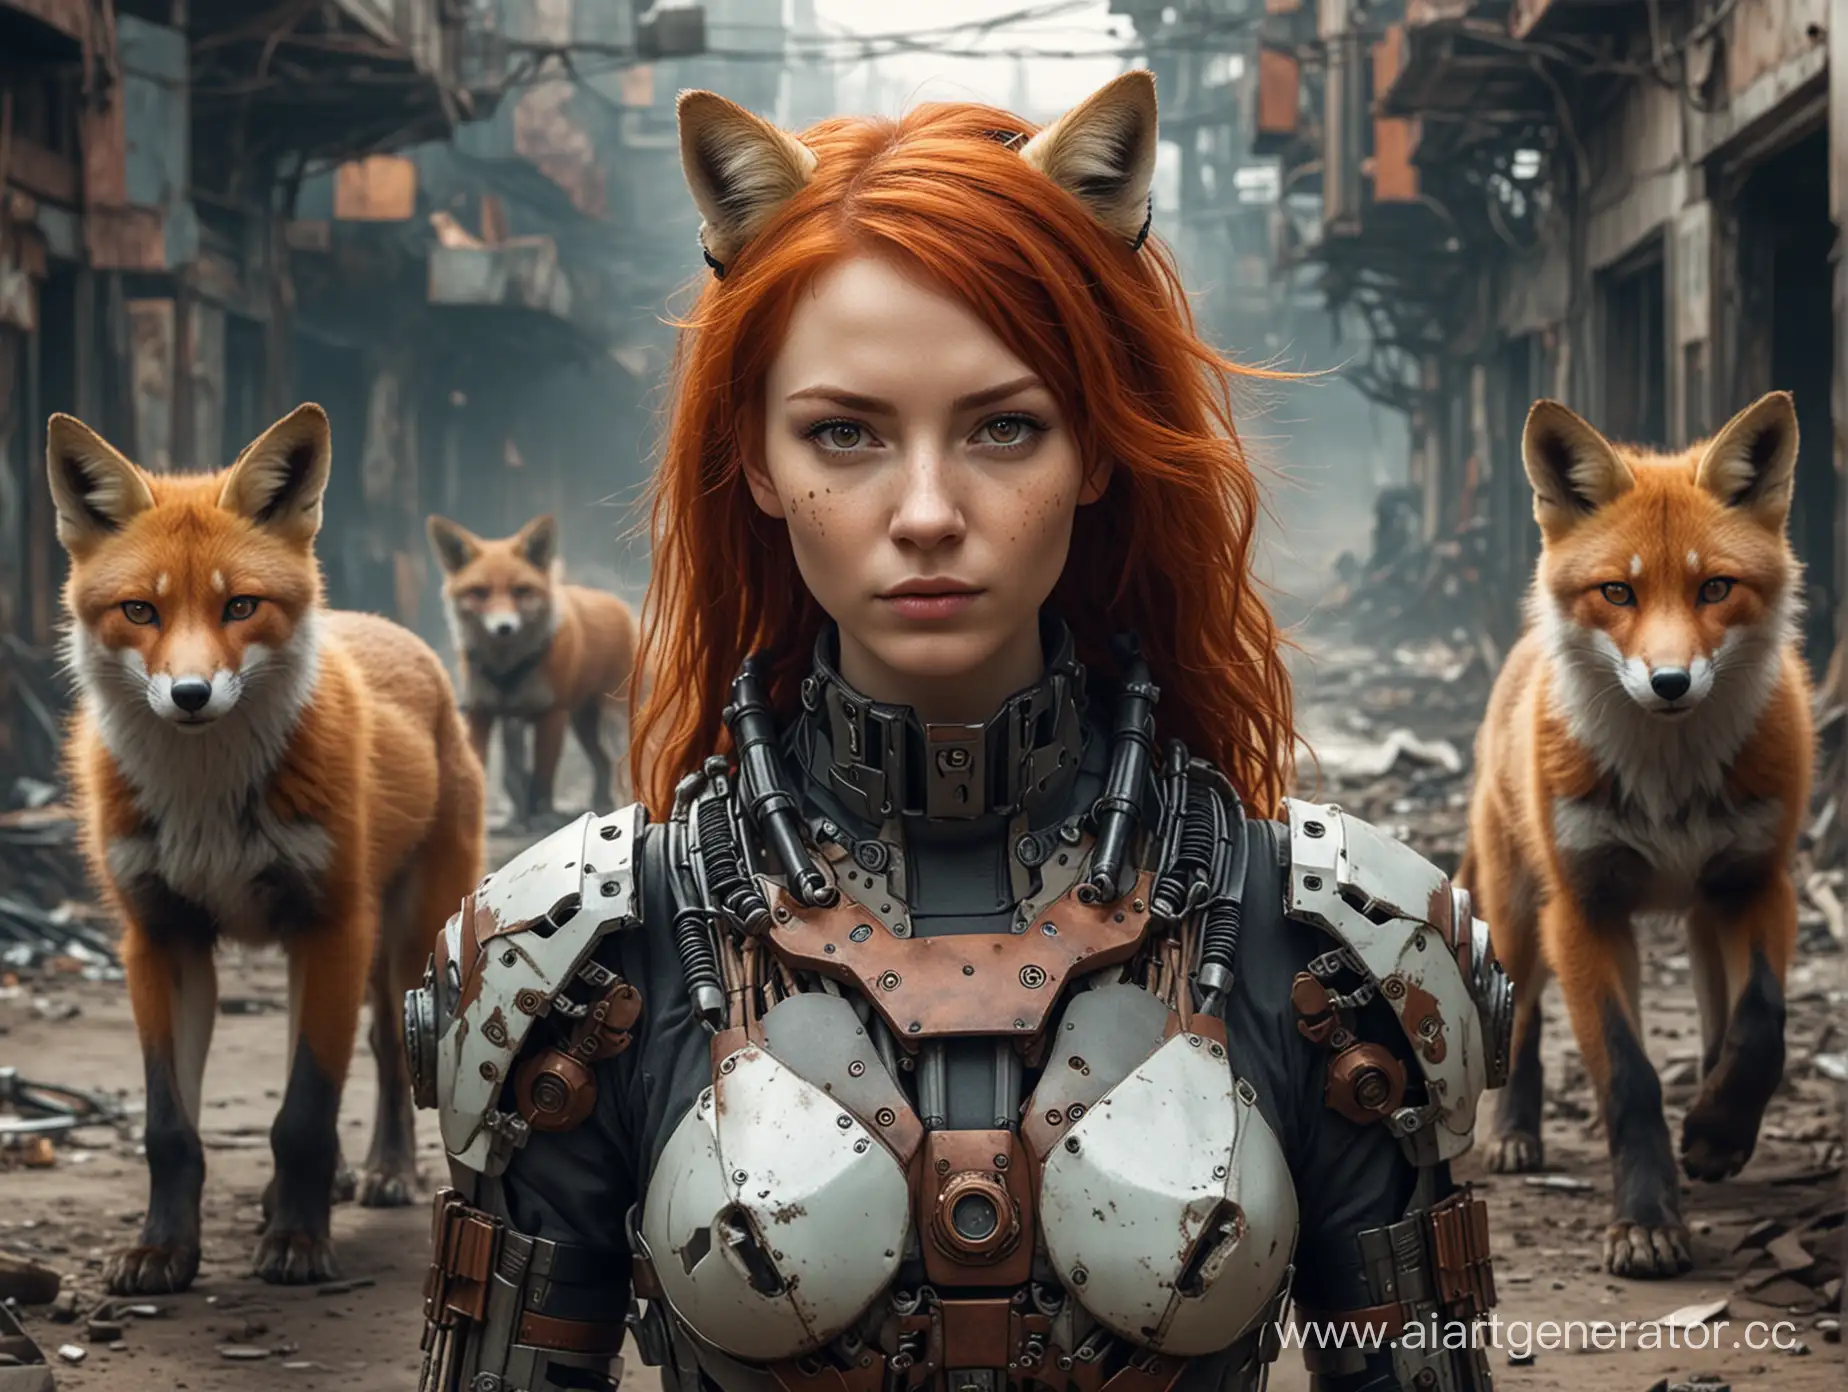 RedHaired-Cyborg-Girl-with-Foxes-in-PostApocalyptic-Landscape